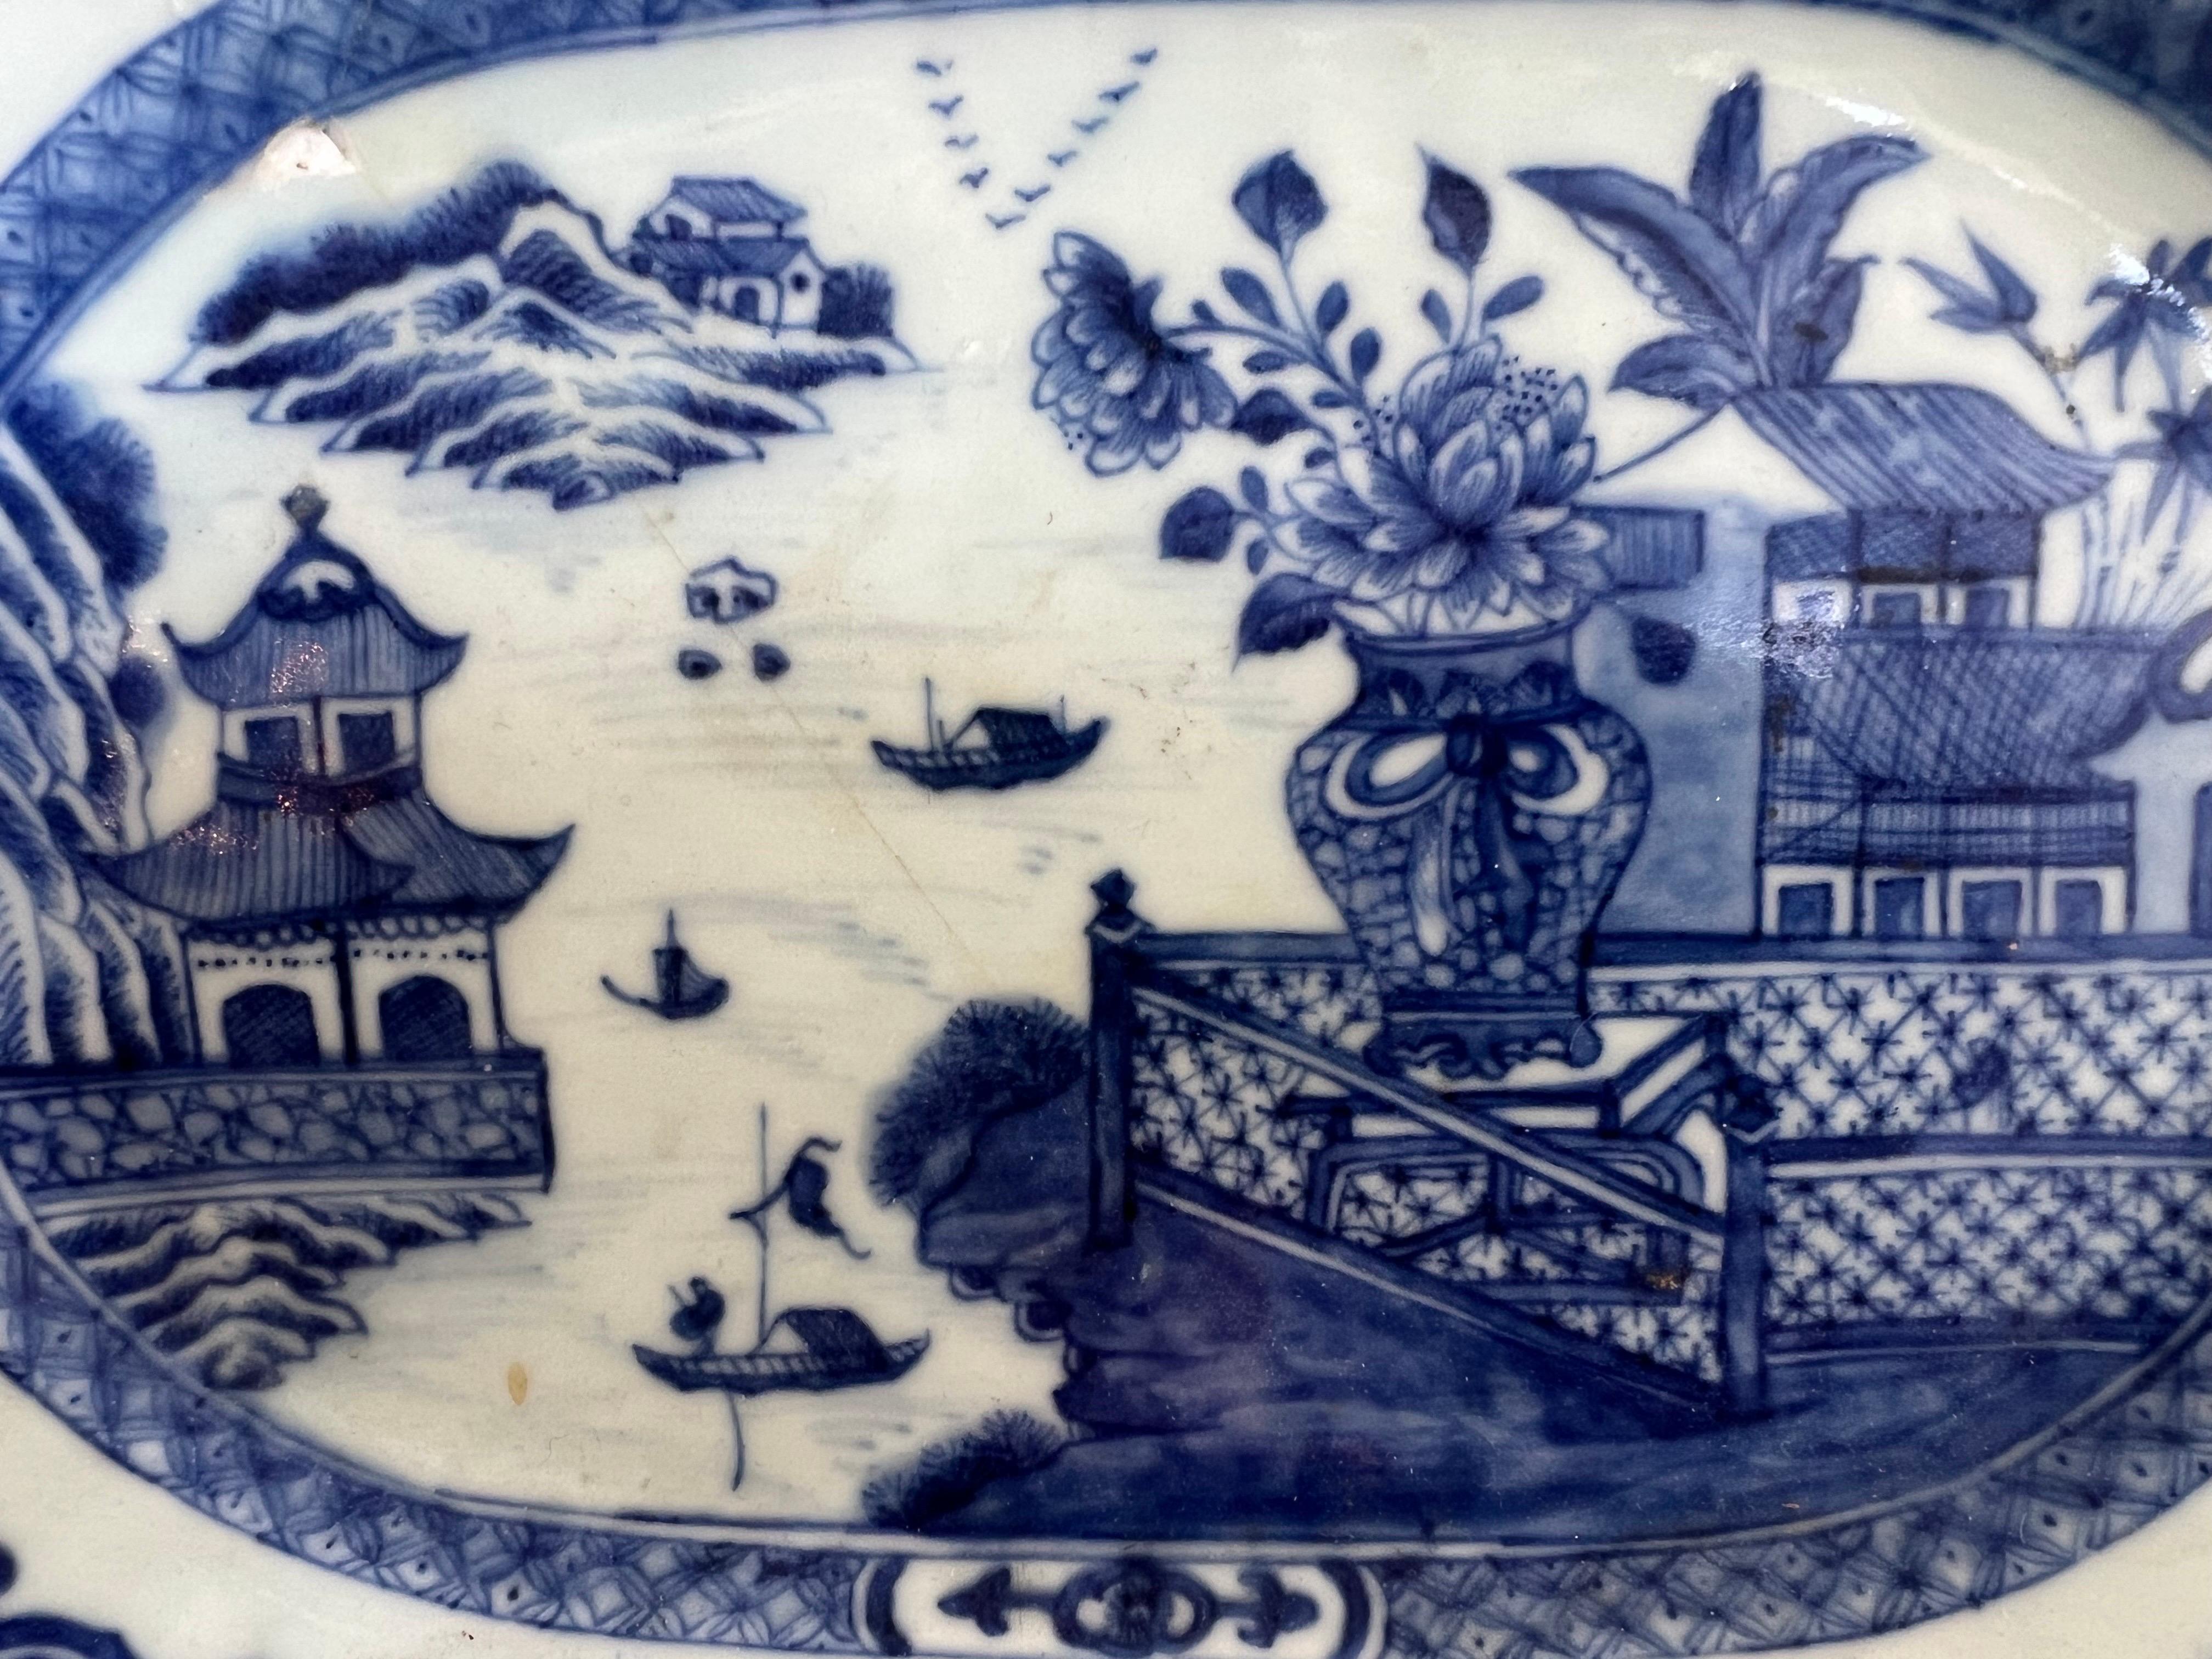 An 18th-century Chinese export octagonal plate featuring a captivating blue and white design.  The intricate scenes depict pagodas, flowers, everyday scenes, lakes, boats, showcasing the artistry of the era.